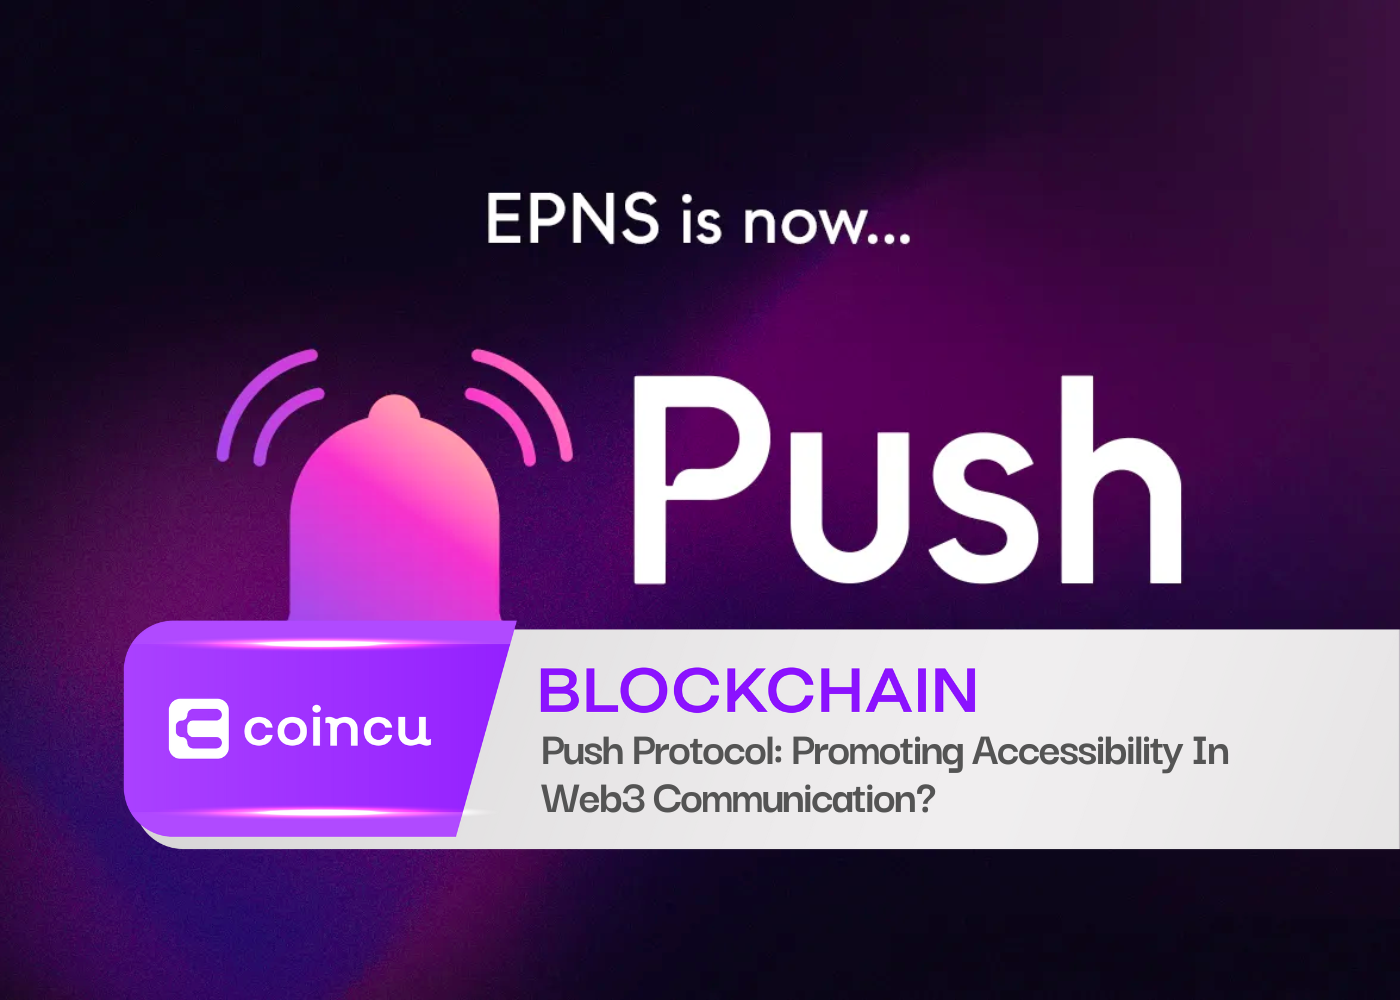 Push Protocol: Promoting Accessibility In Web3 Communication?